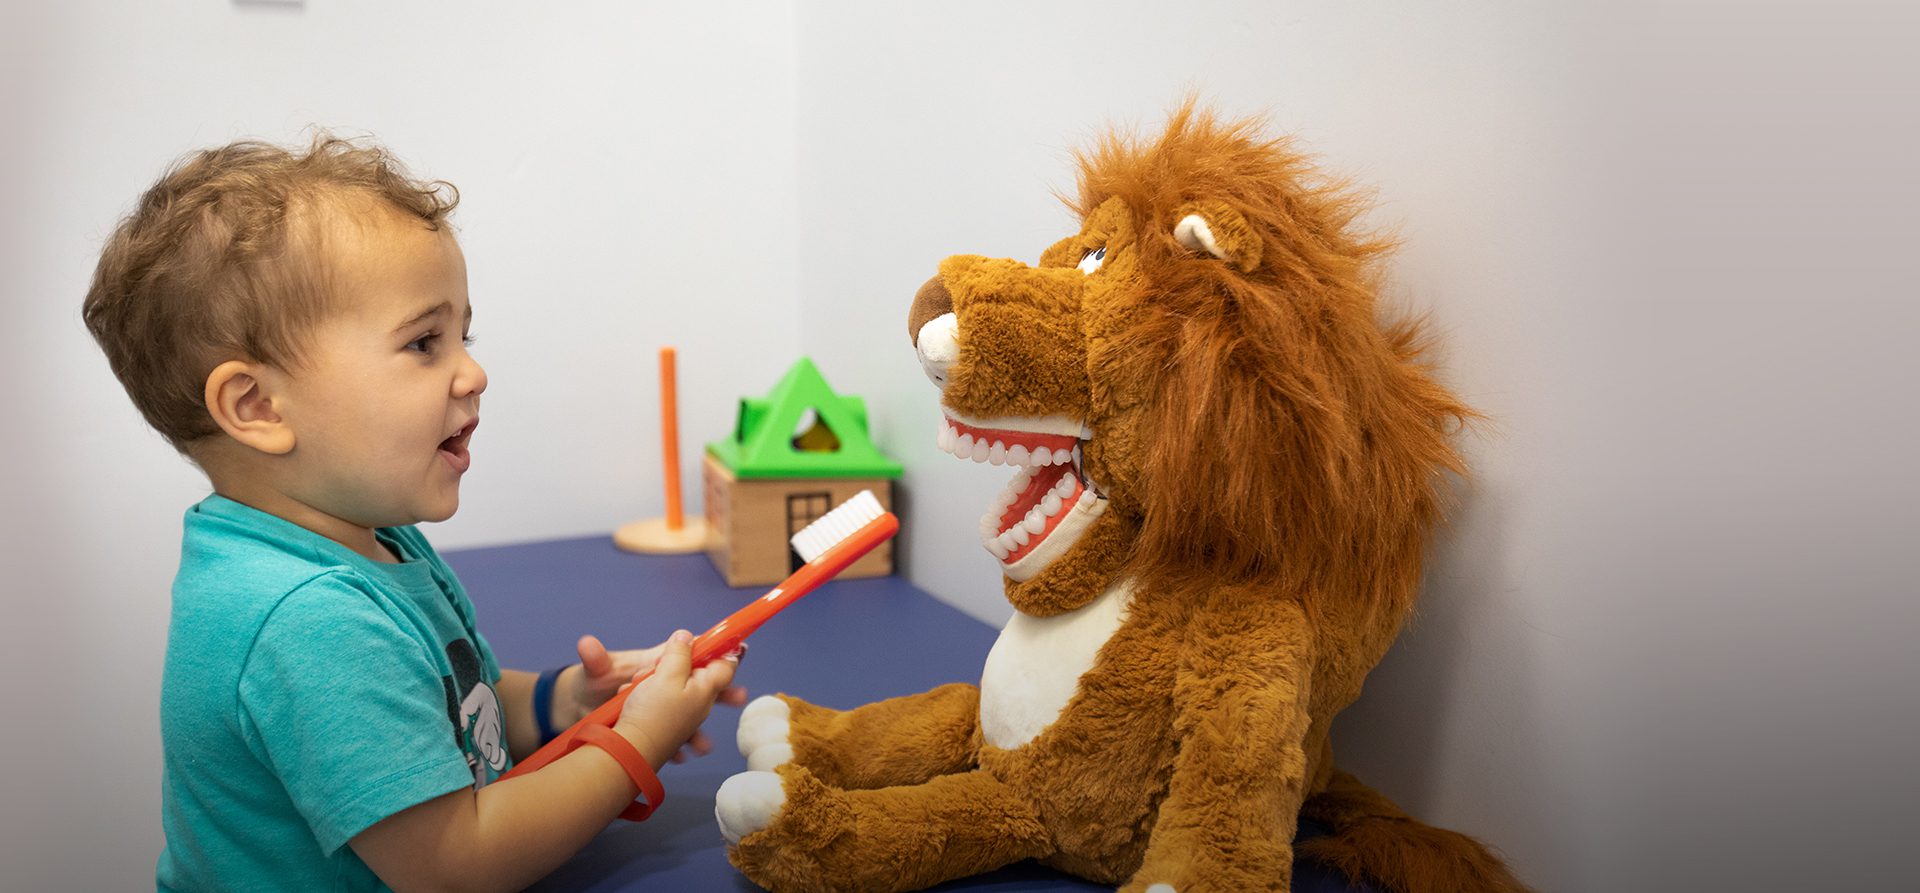 A happy toddler practices dental hygiene on a plush lion's specially designed toy teeth